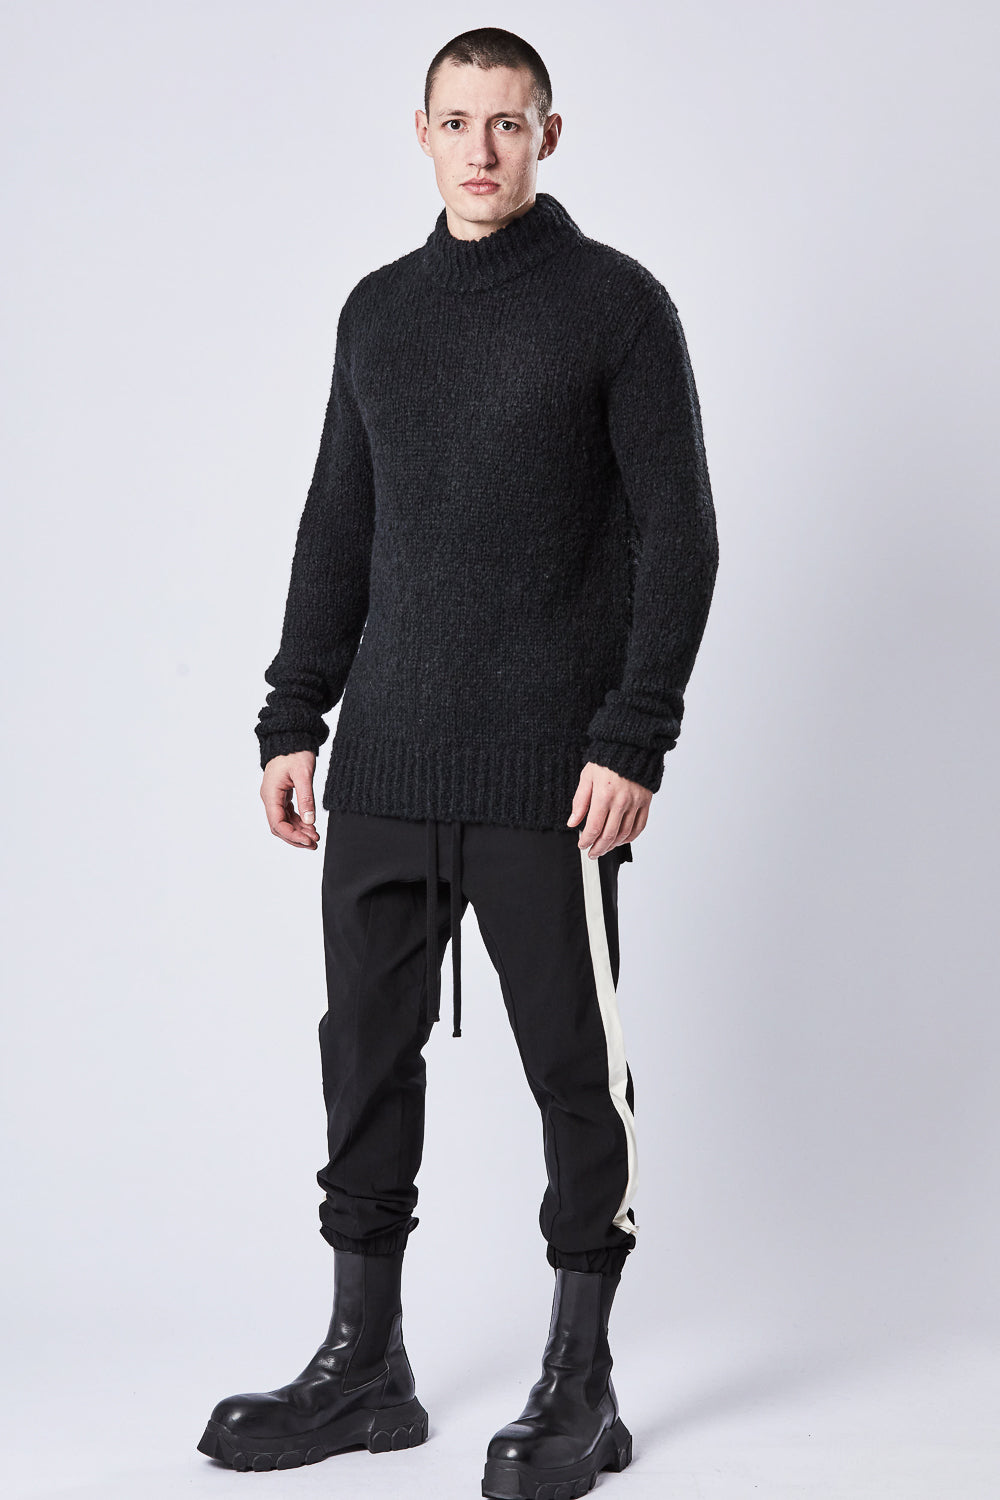 Buy the Thom Krom M K 109 Knitwear in Black at Intro. Spend £50 for free UK delivery. Official stockists. We ship worldwide.